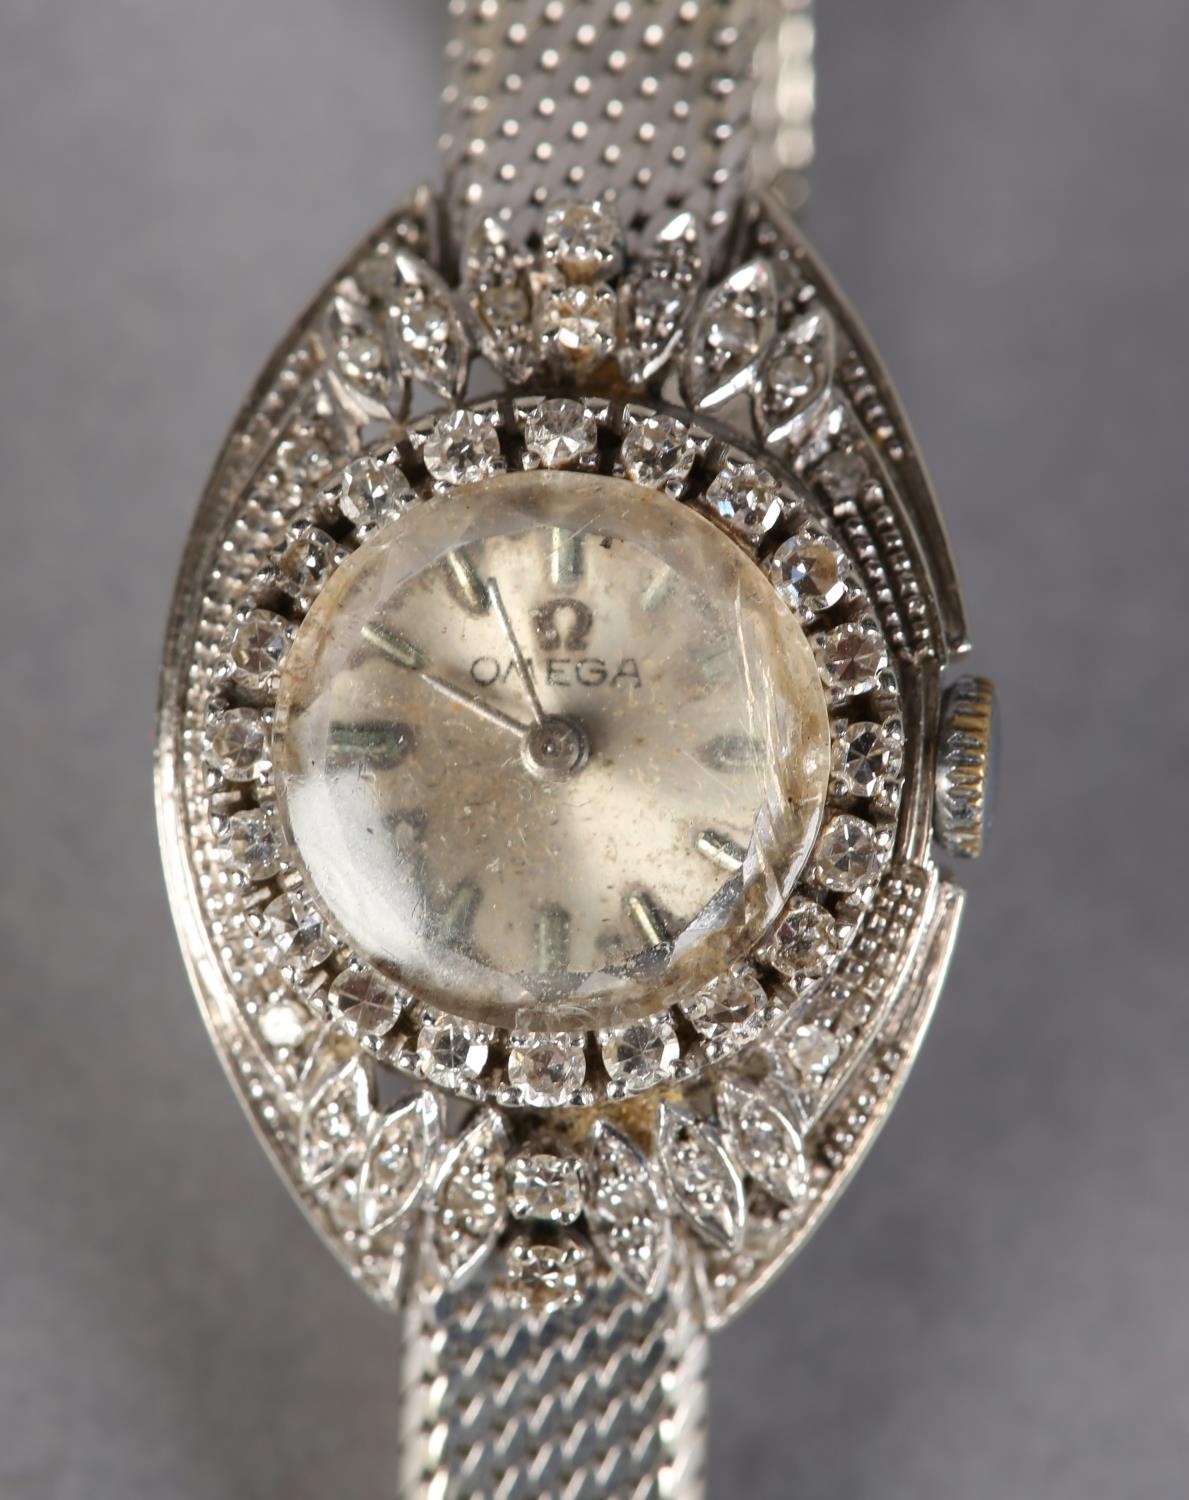 AN OMEGA LADY'S DIAMOND COCKTAIL WRISTWATCH, c.1965, 17 jewelled 484 movement No. 22672309, silvered - Image 3 of 4